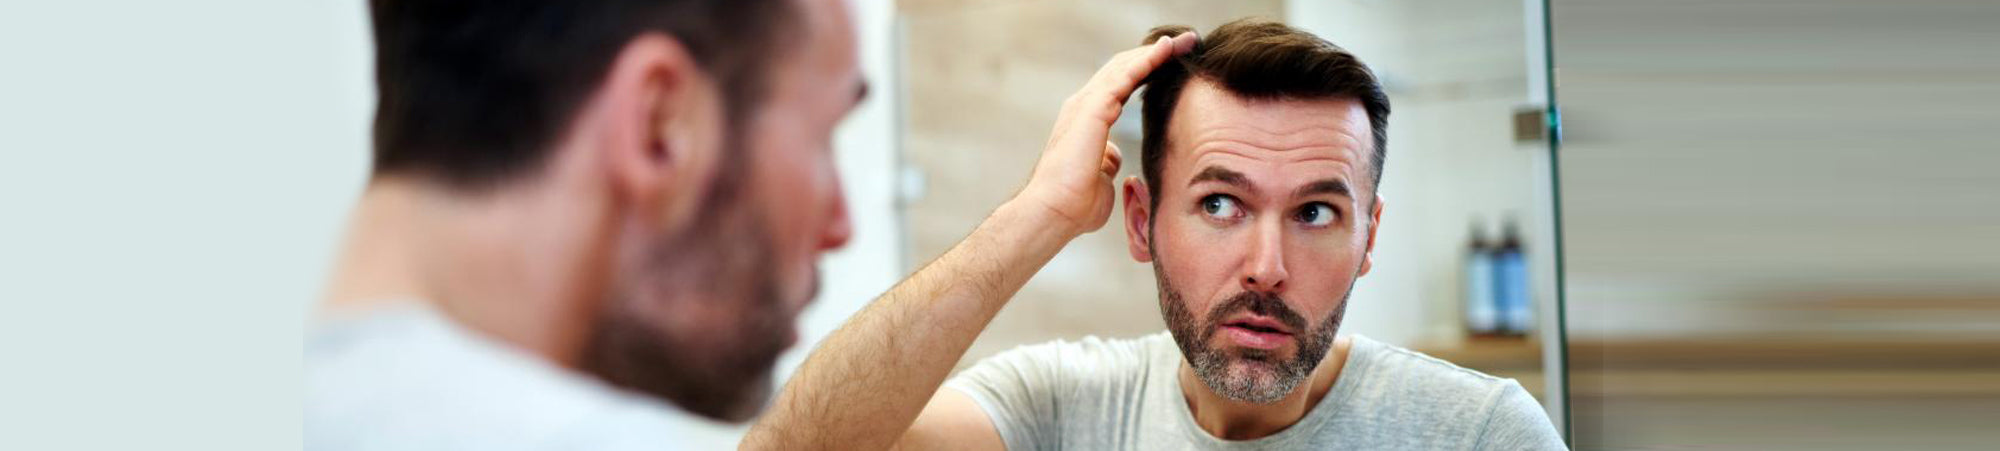 The Emotional Impact Of Hair Loss